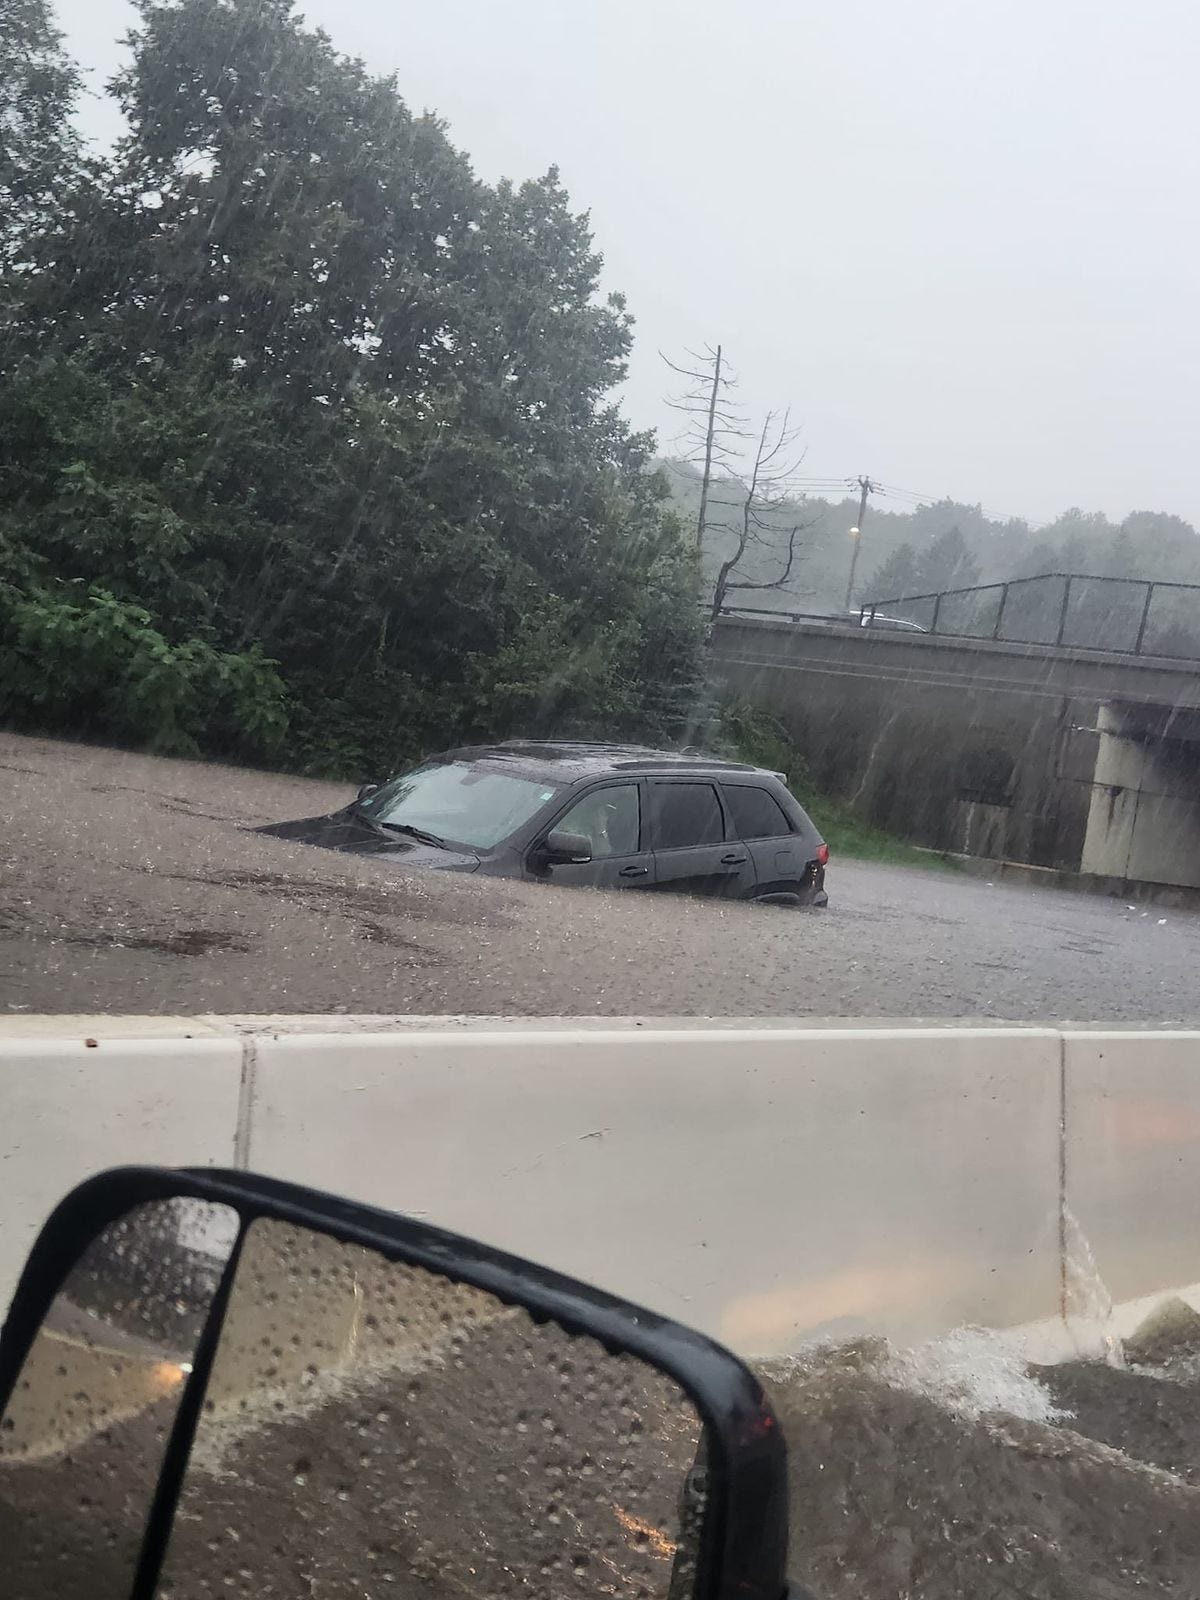 An SUV in Fitchburg, Massachusetts, submerged up to the hood in flood water, stranded on the highway